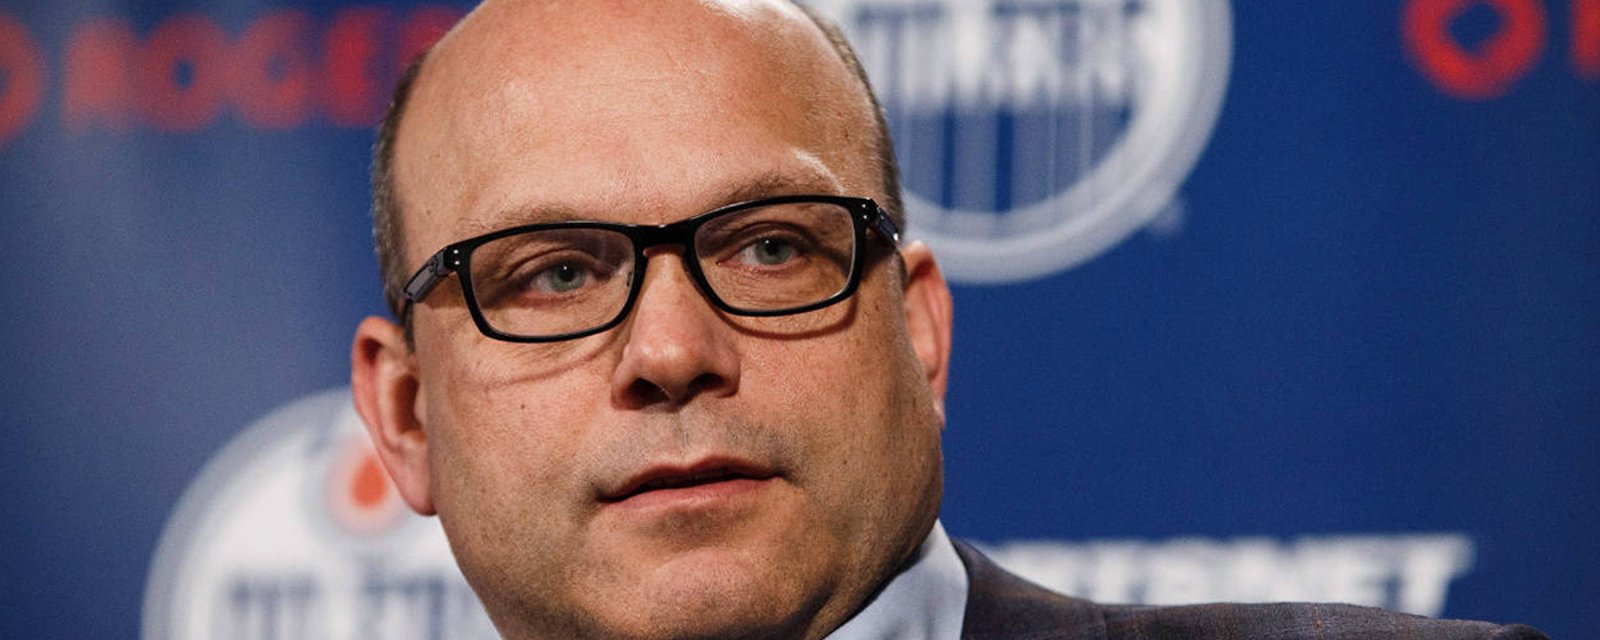 ICYMI: The Oilers have fired GM Peter Chiarelli